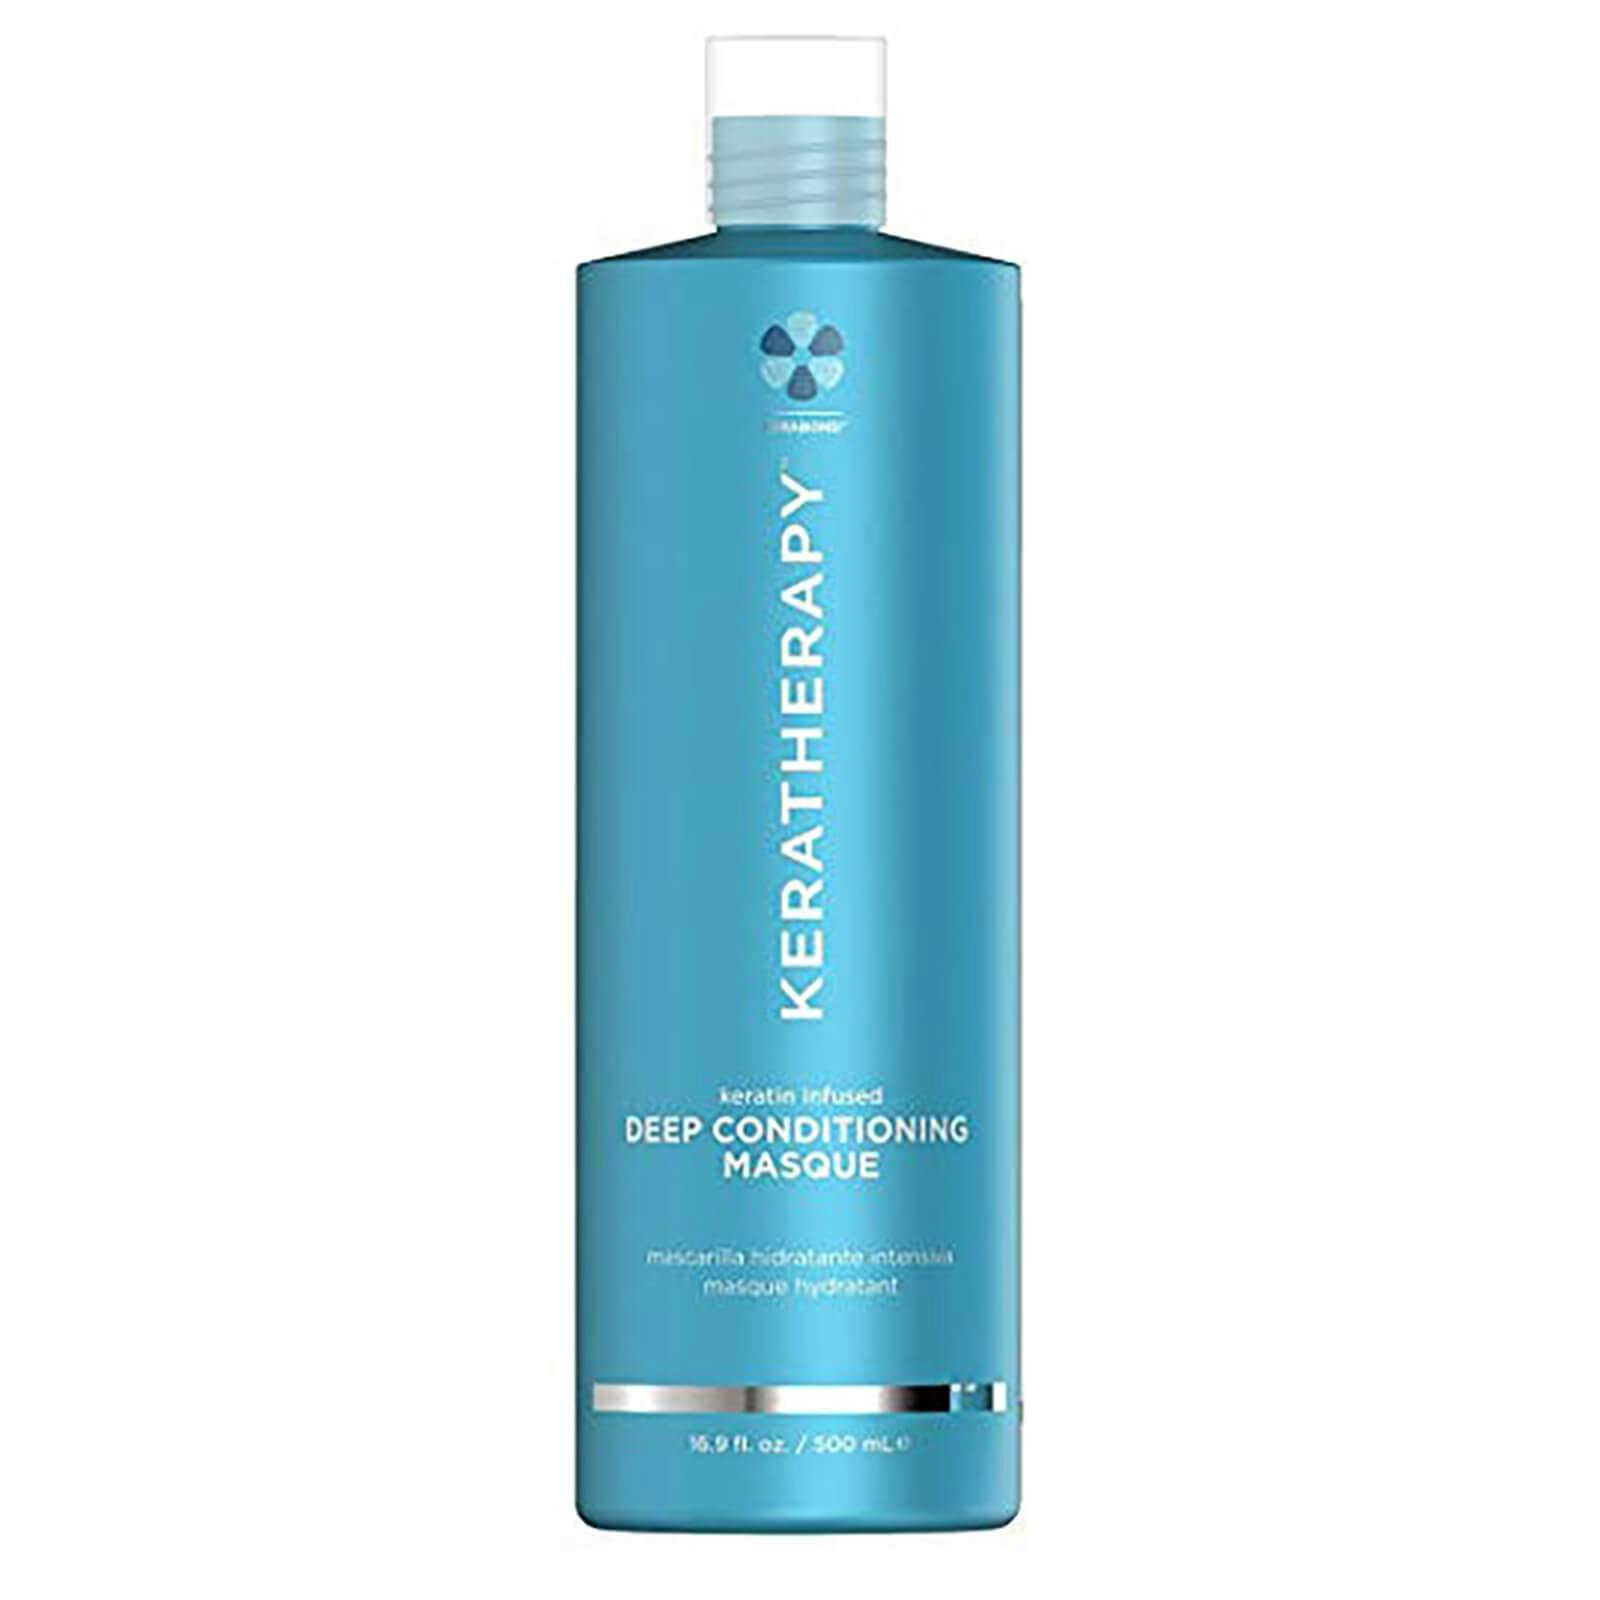 Keratherapy Keratin Infused Deep Conditioning Masque 500ml